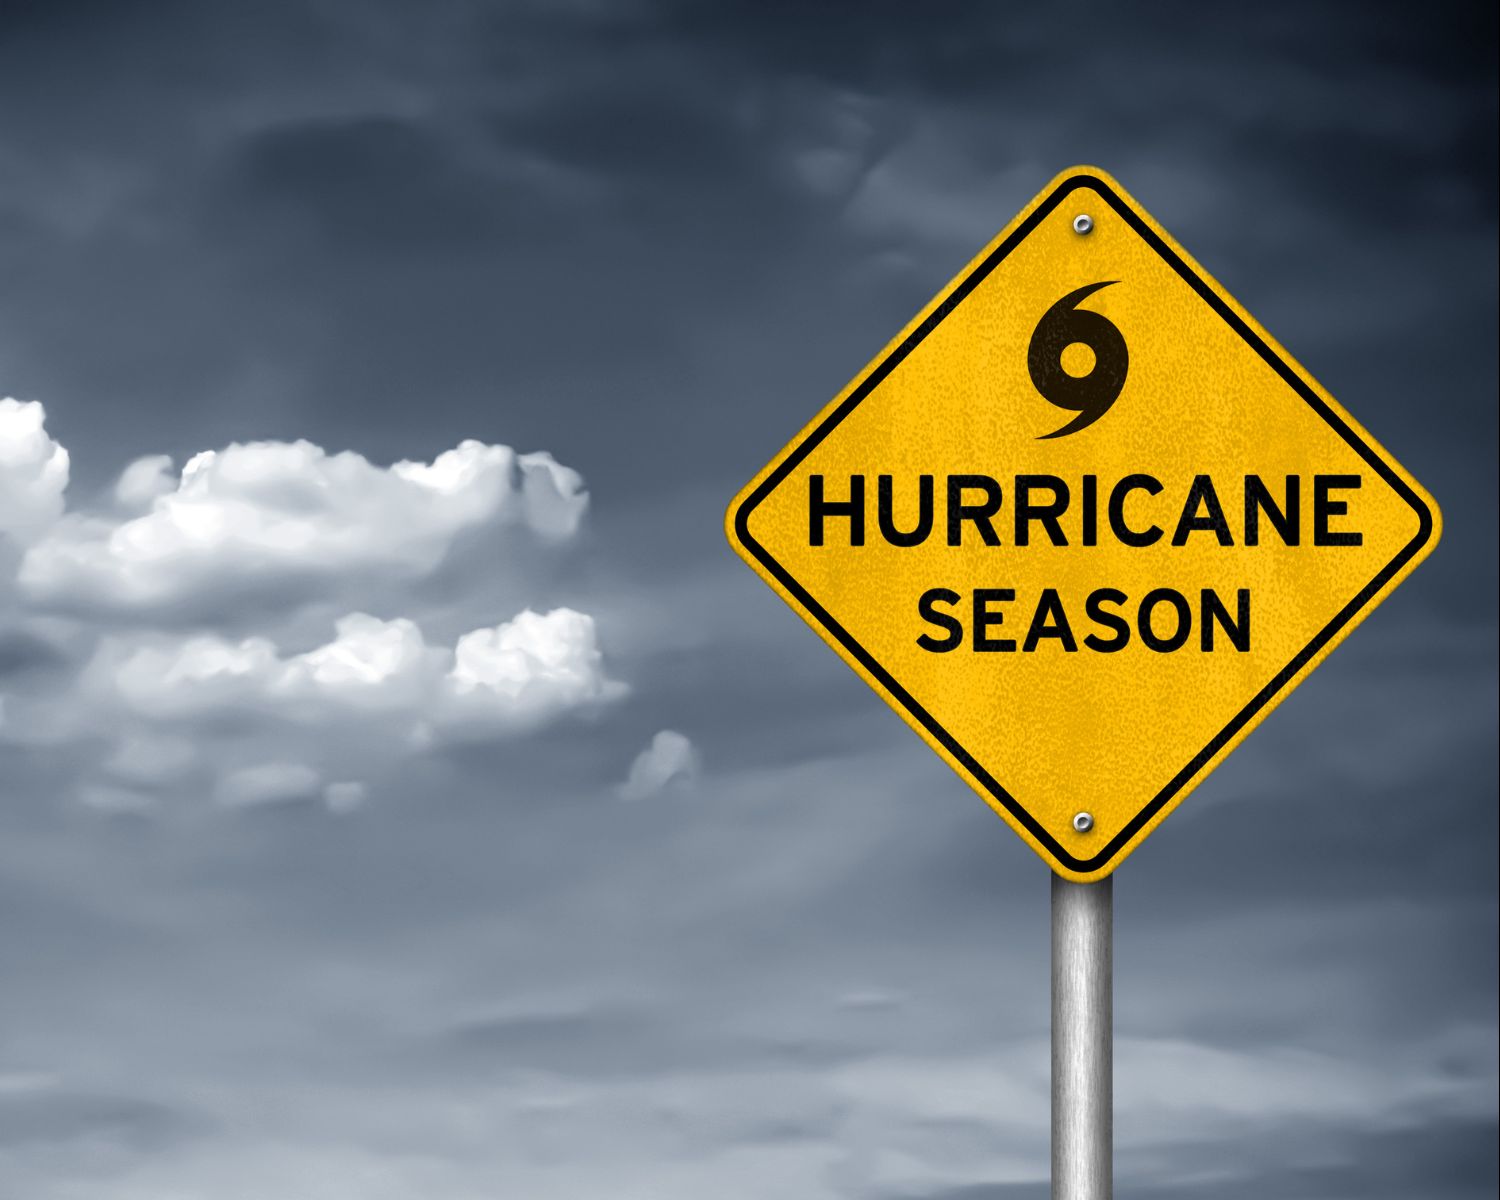 Are You Good to Go? Hurricane Preparedness for your Home